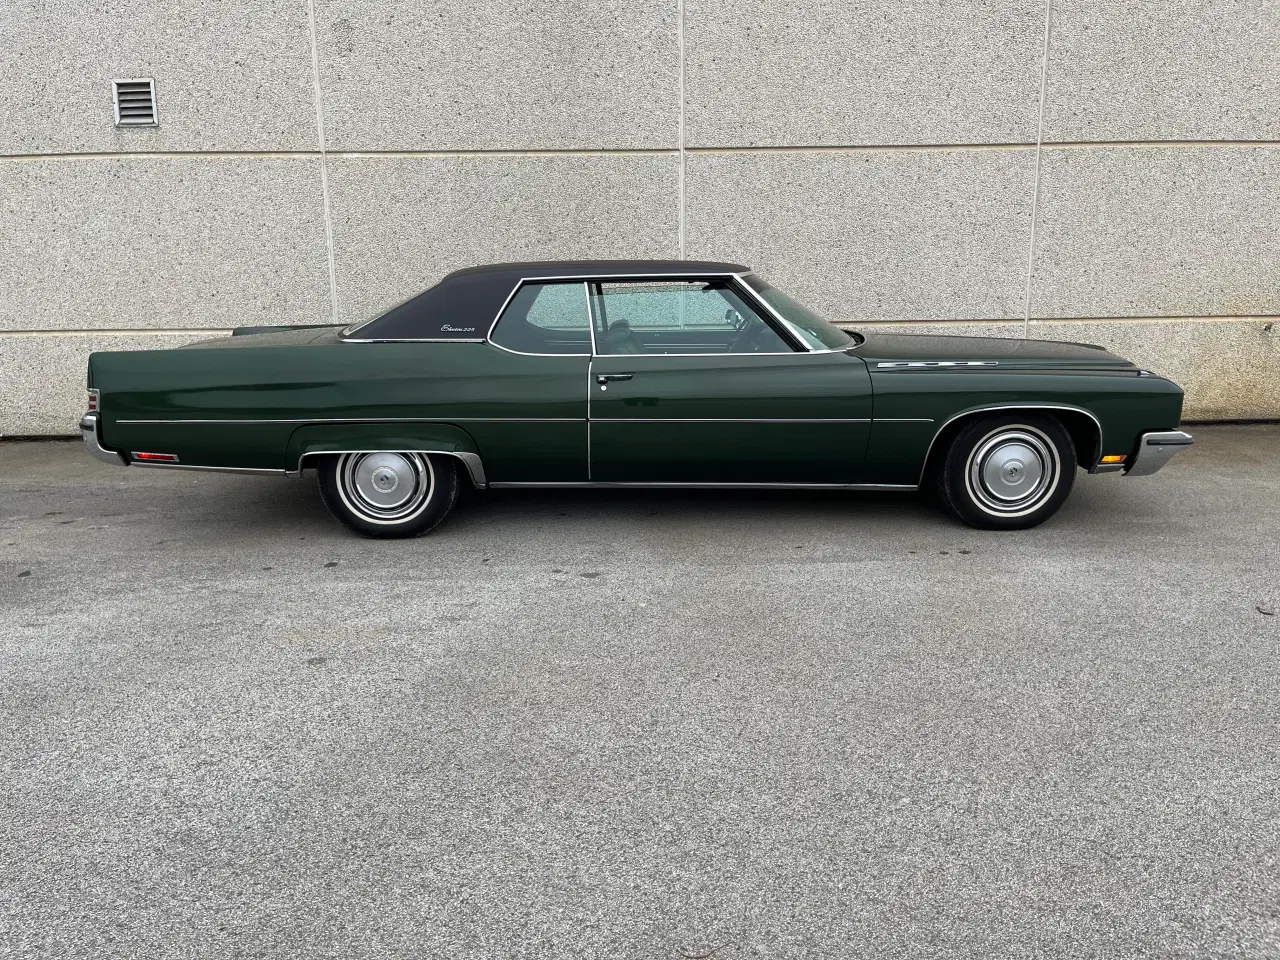 Billede 2 - Buick Electra 225 coupe